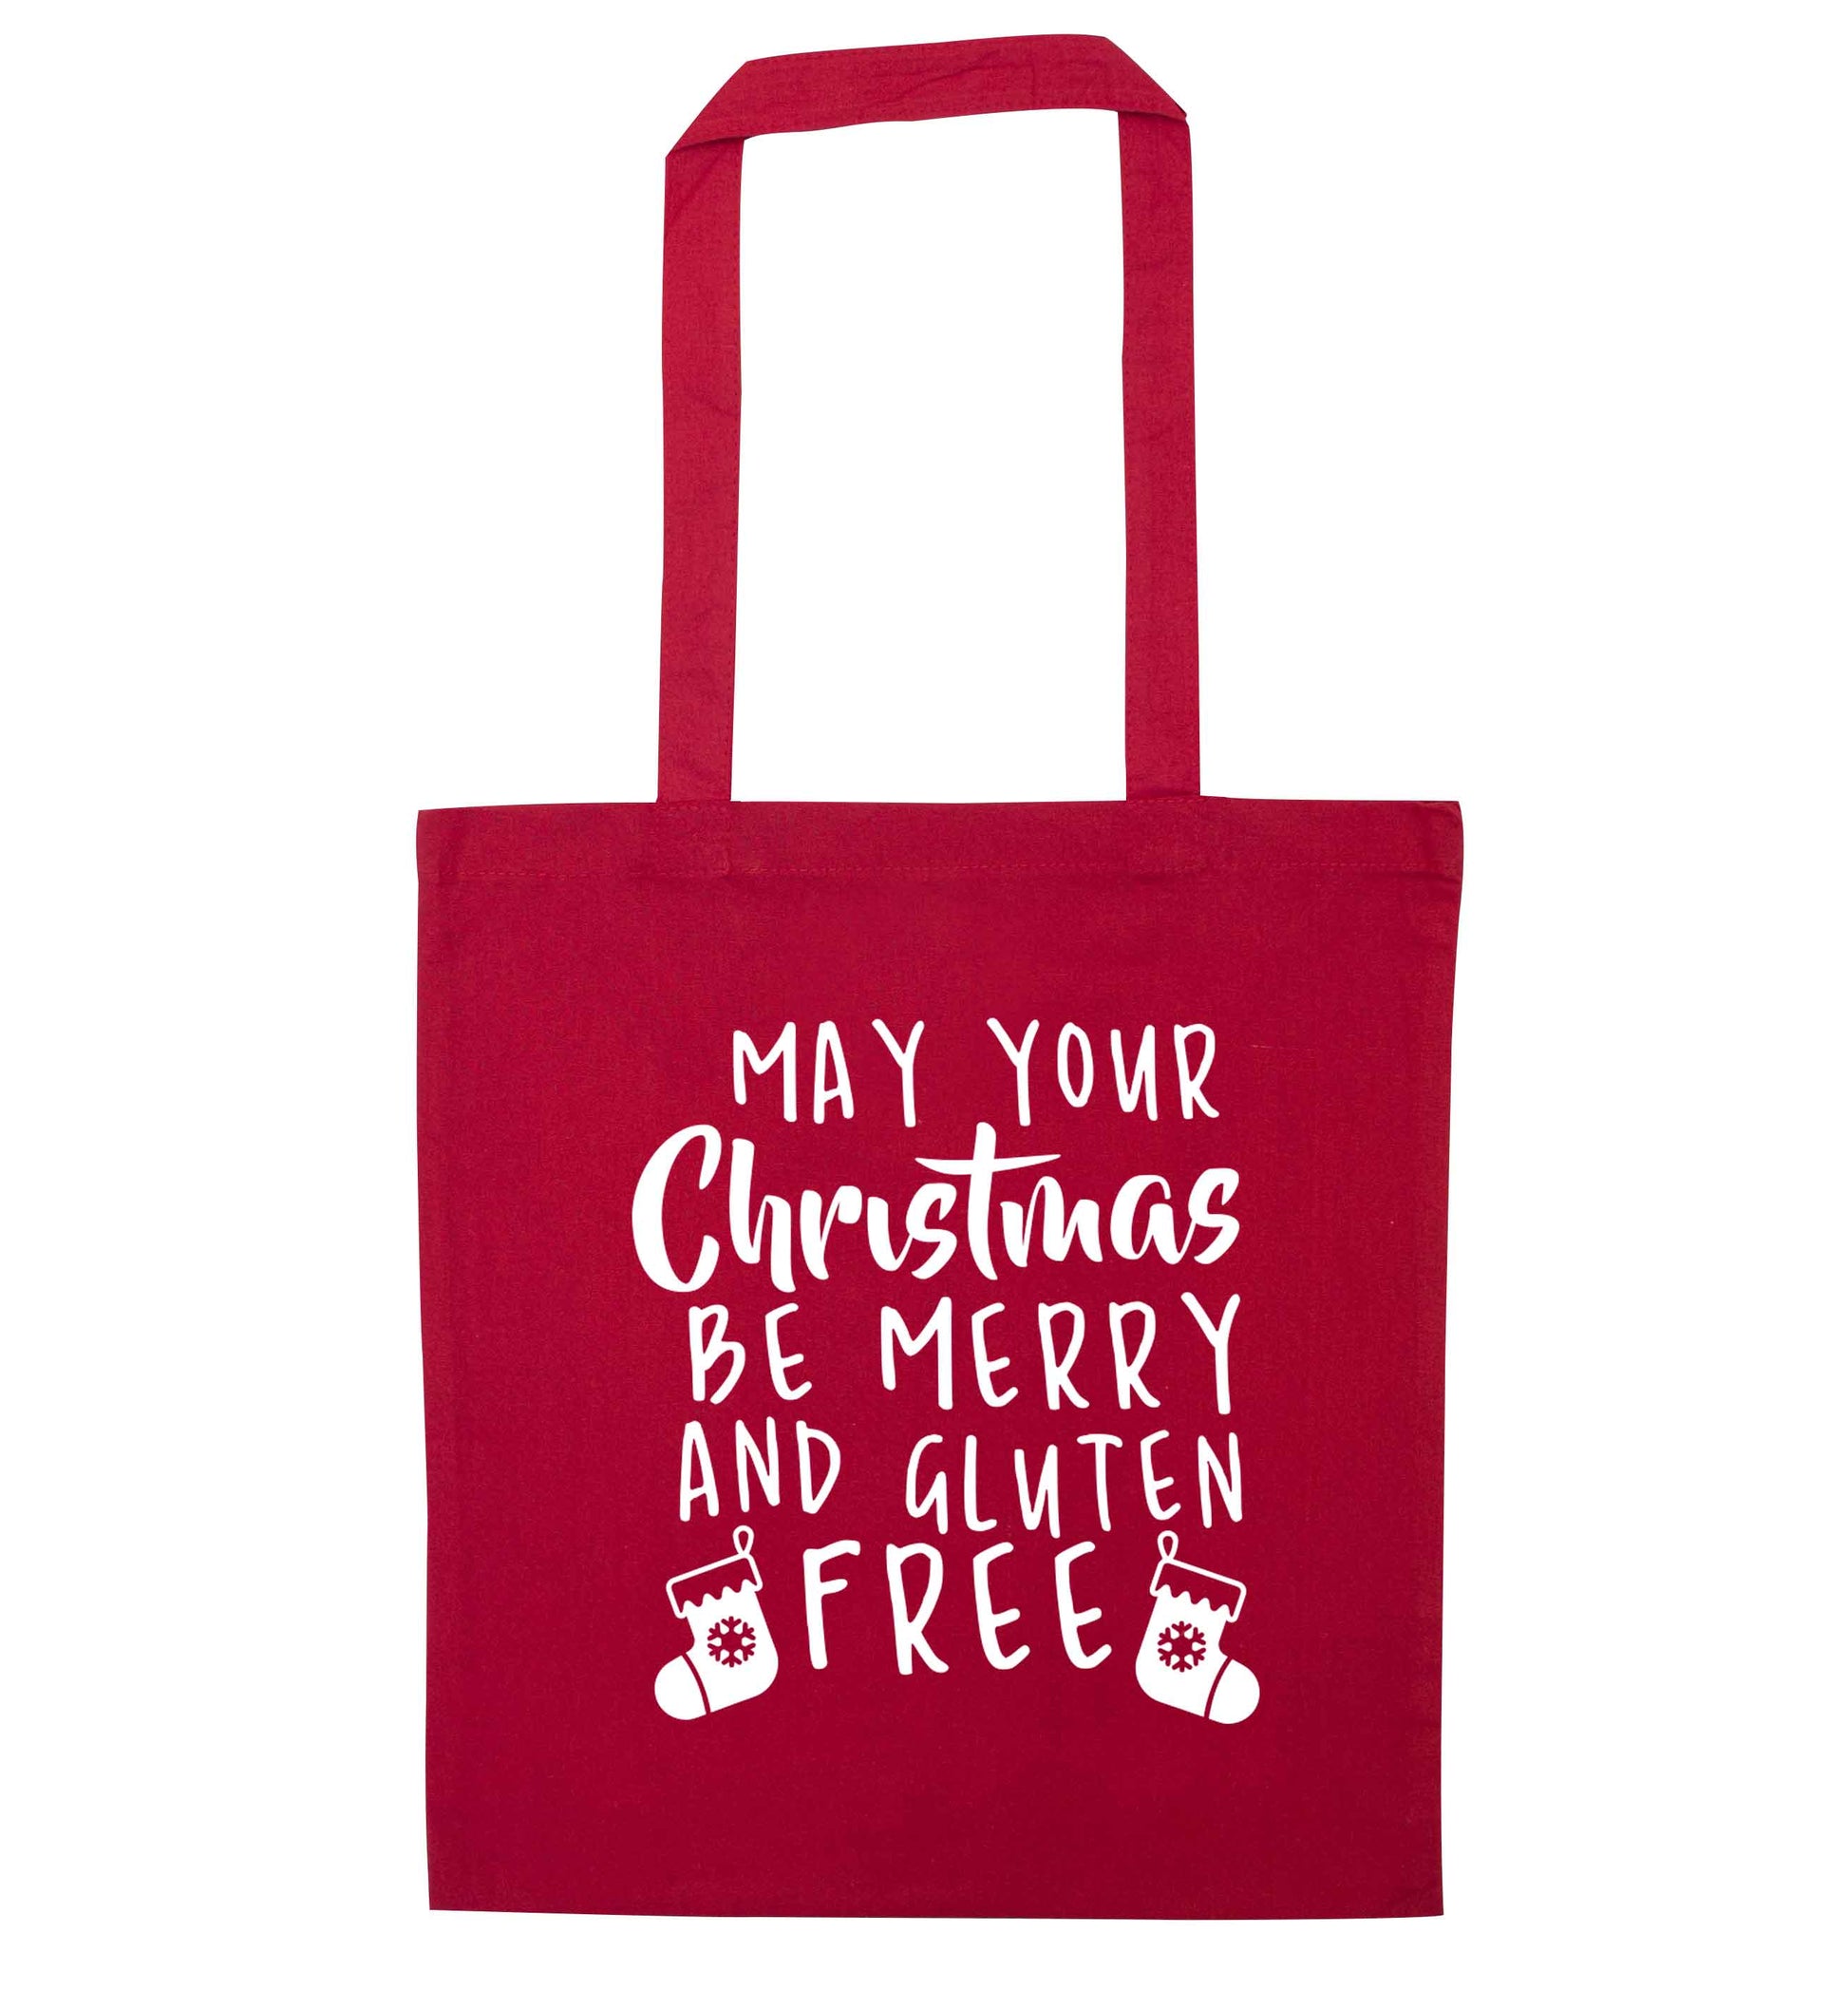 May your Christmas be merry and gluten free red tote bag